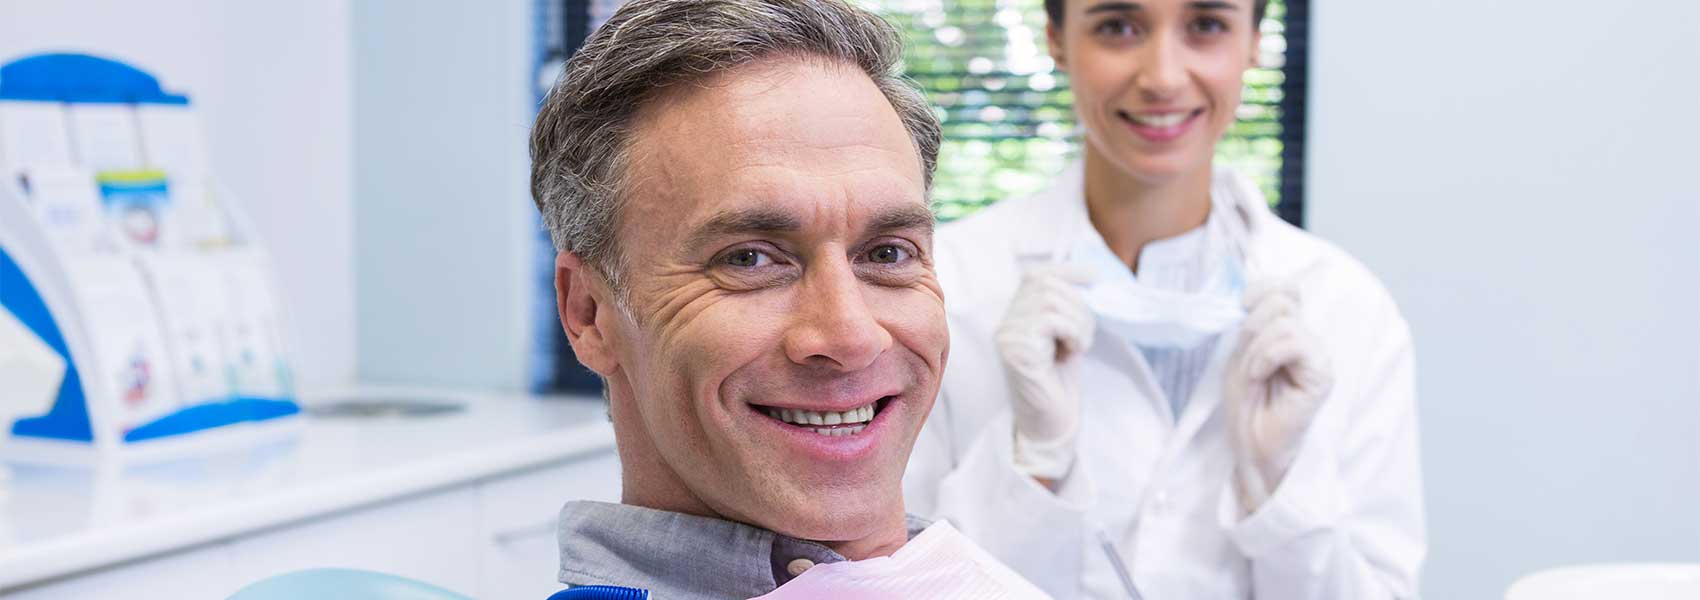 Patient waiting for oral cancer screening at dental